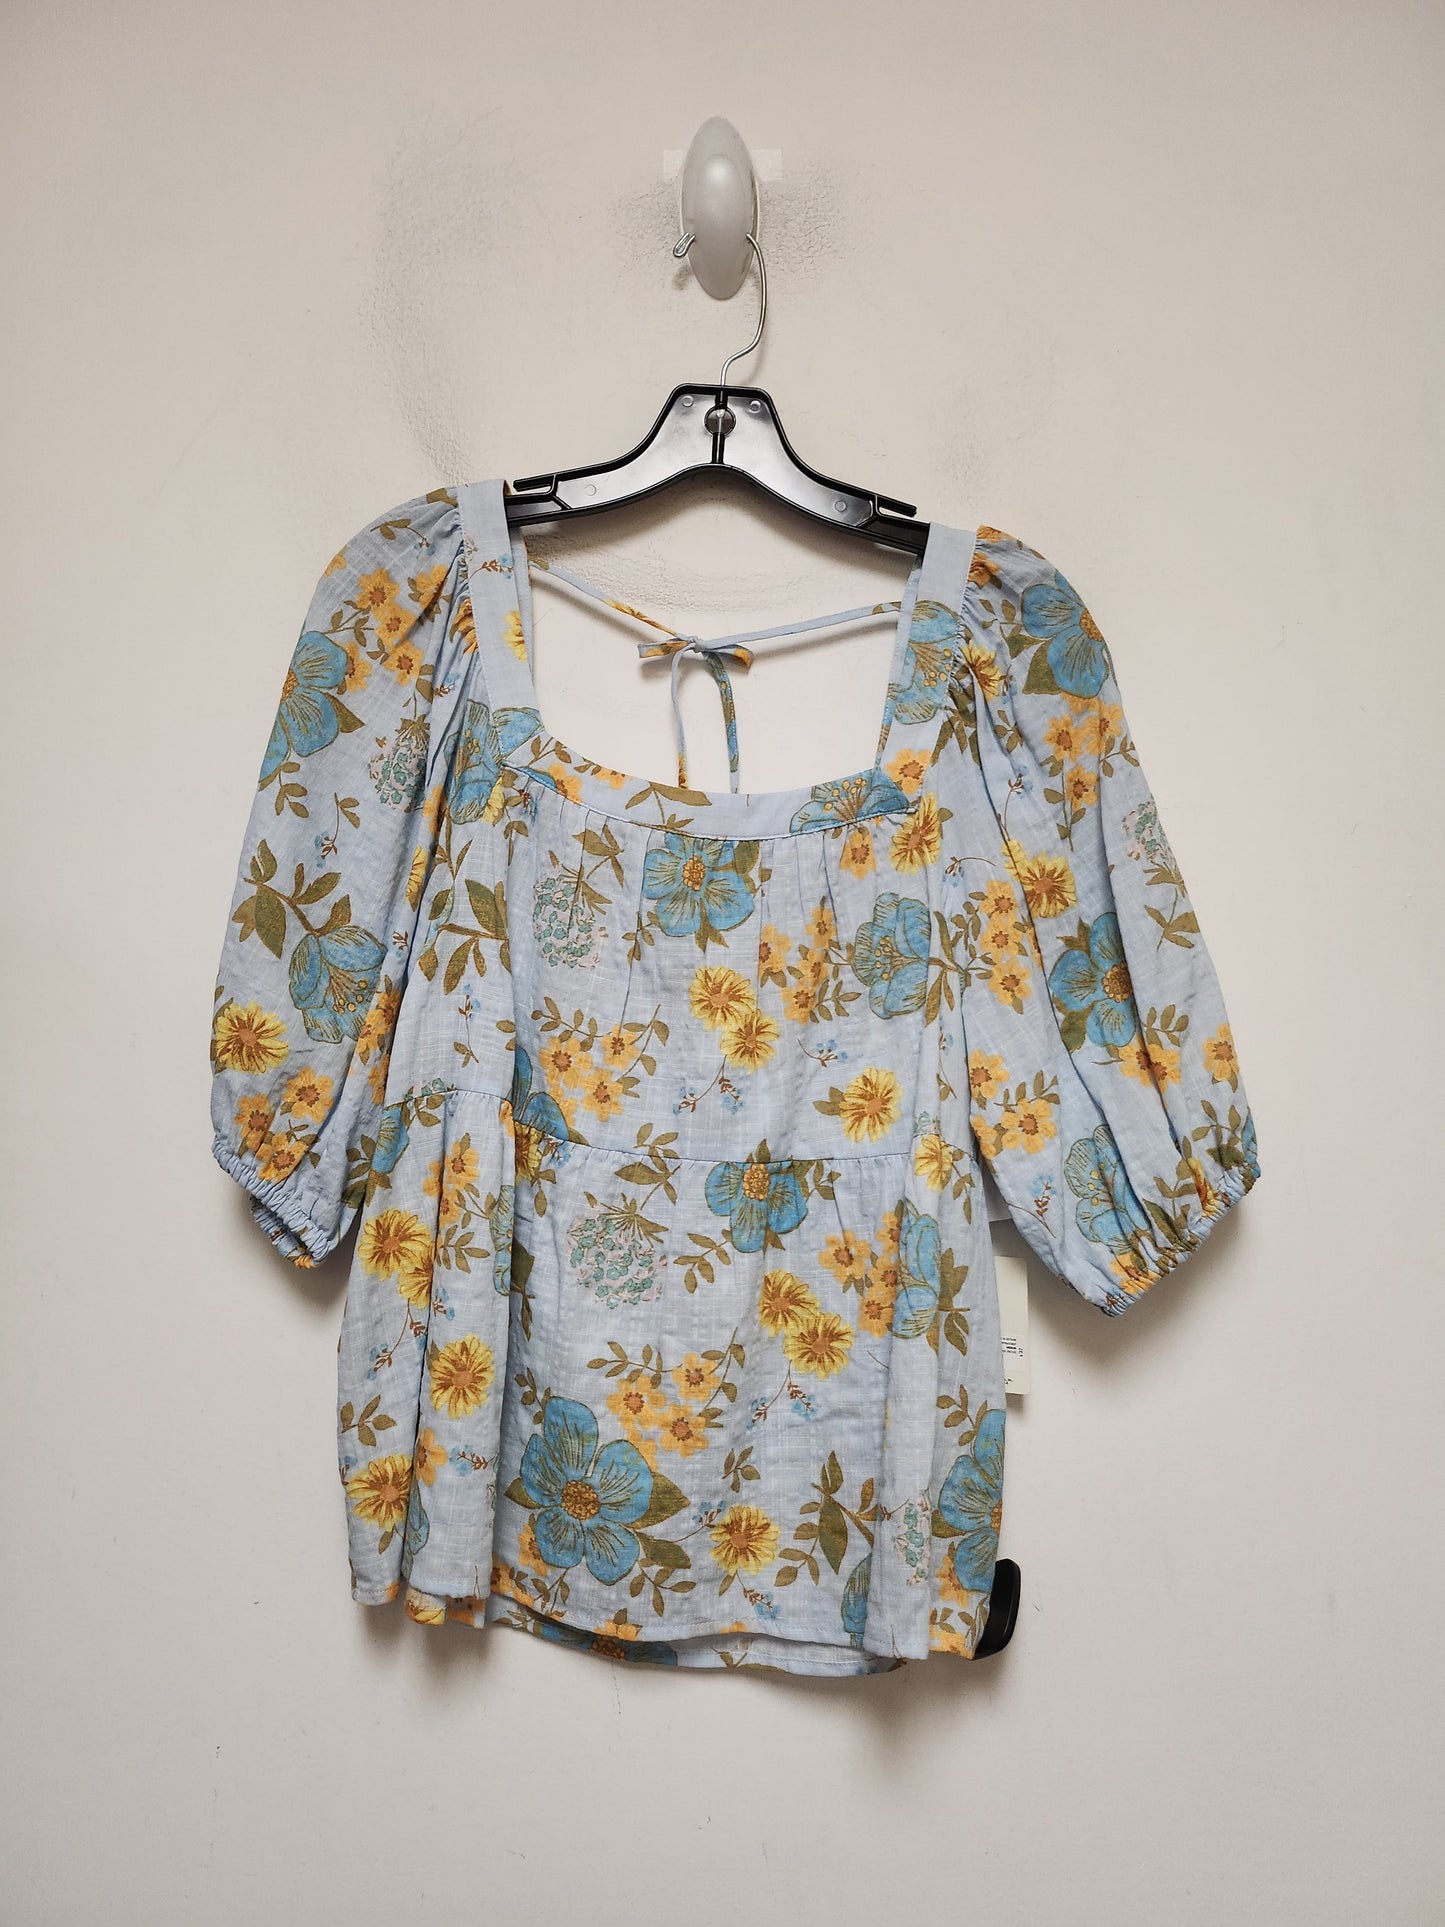 Floral Print Top Short Sleeve Ana, Size M